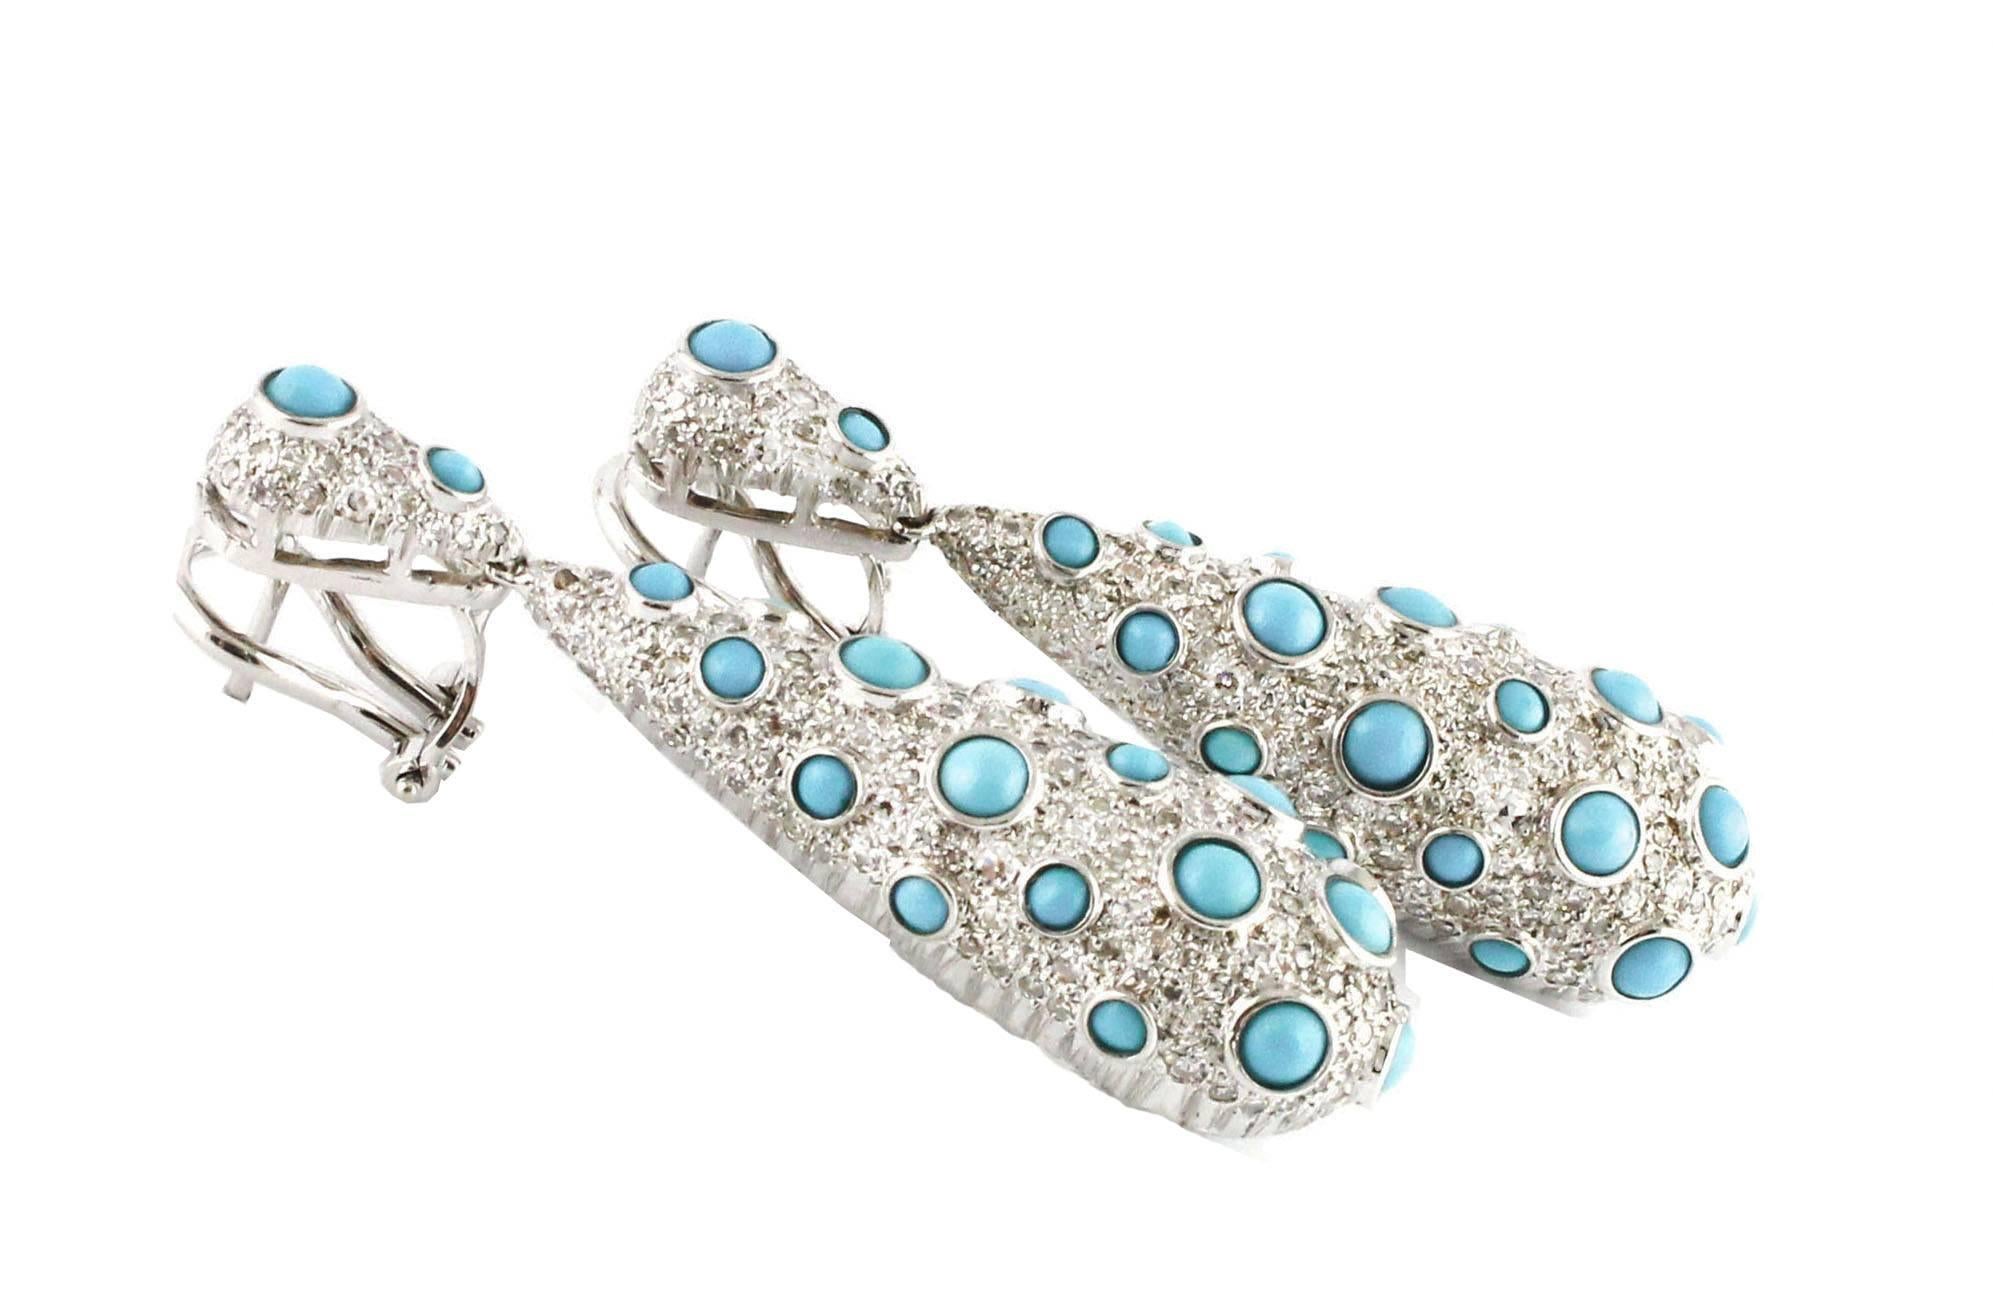 
Charming 14 kt white gold dangle earrings, with 3.37 ct diamond , and beautiful turquoise stones 0.70 g 
Diamonds ct 3.74
Turquoise g 0.70
Total weight g 19.50
R.F + eaif

For any enquires, please contact the seller through the message center.